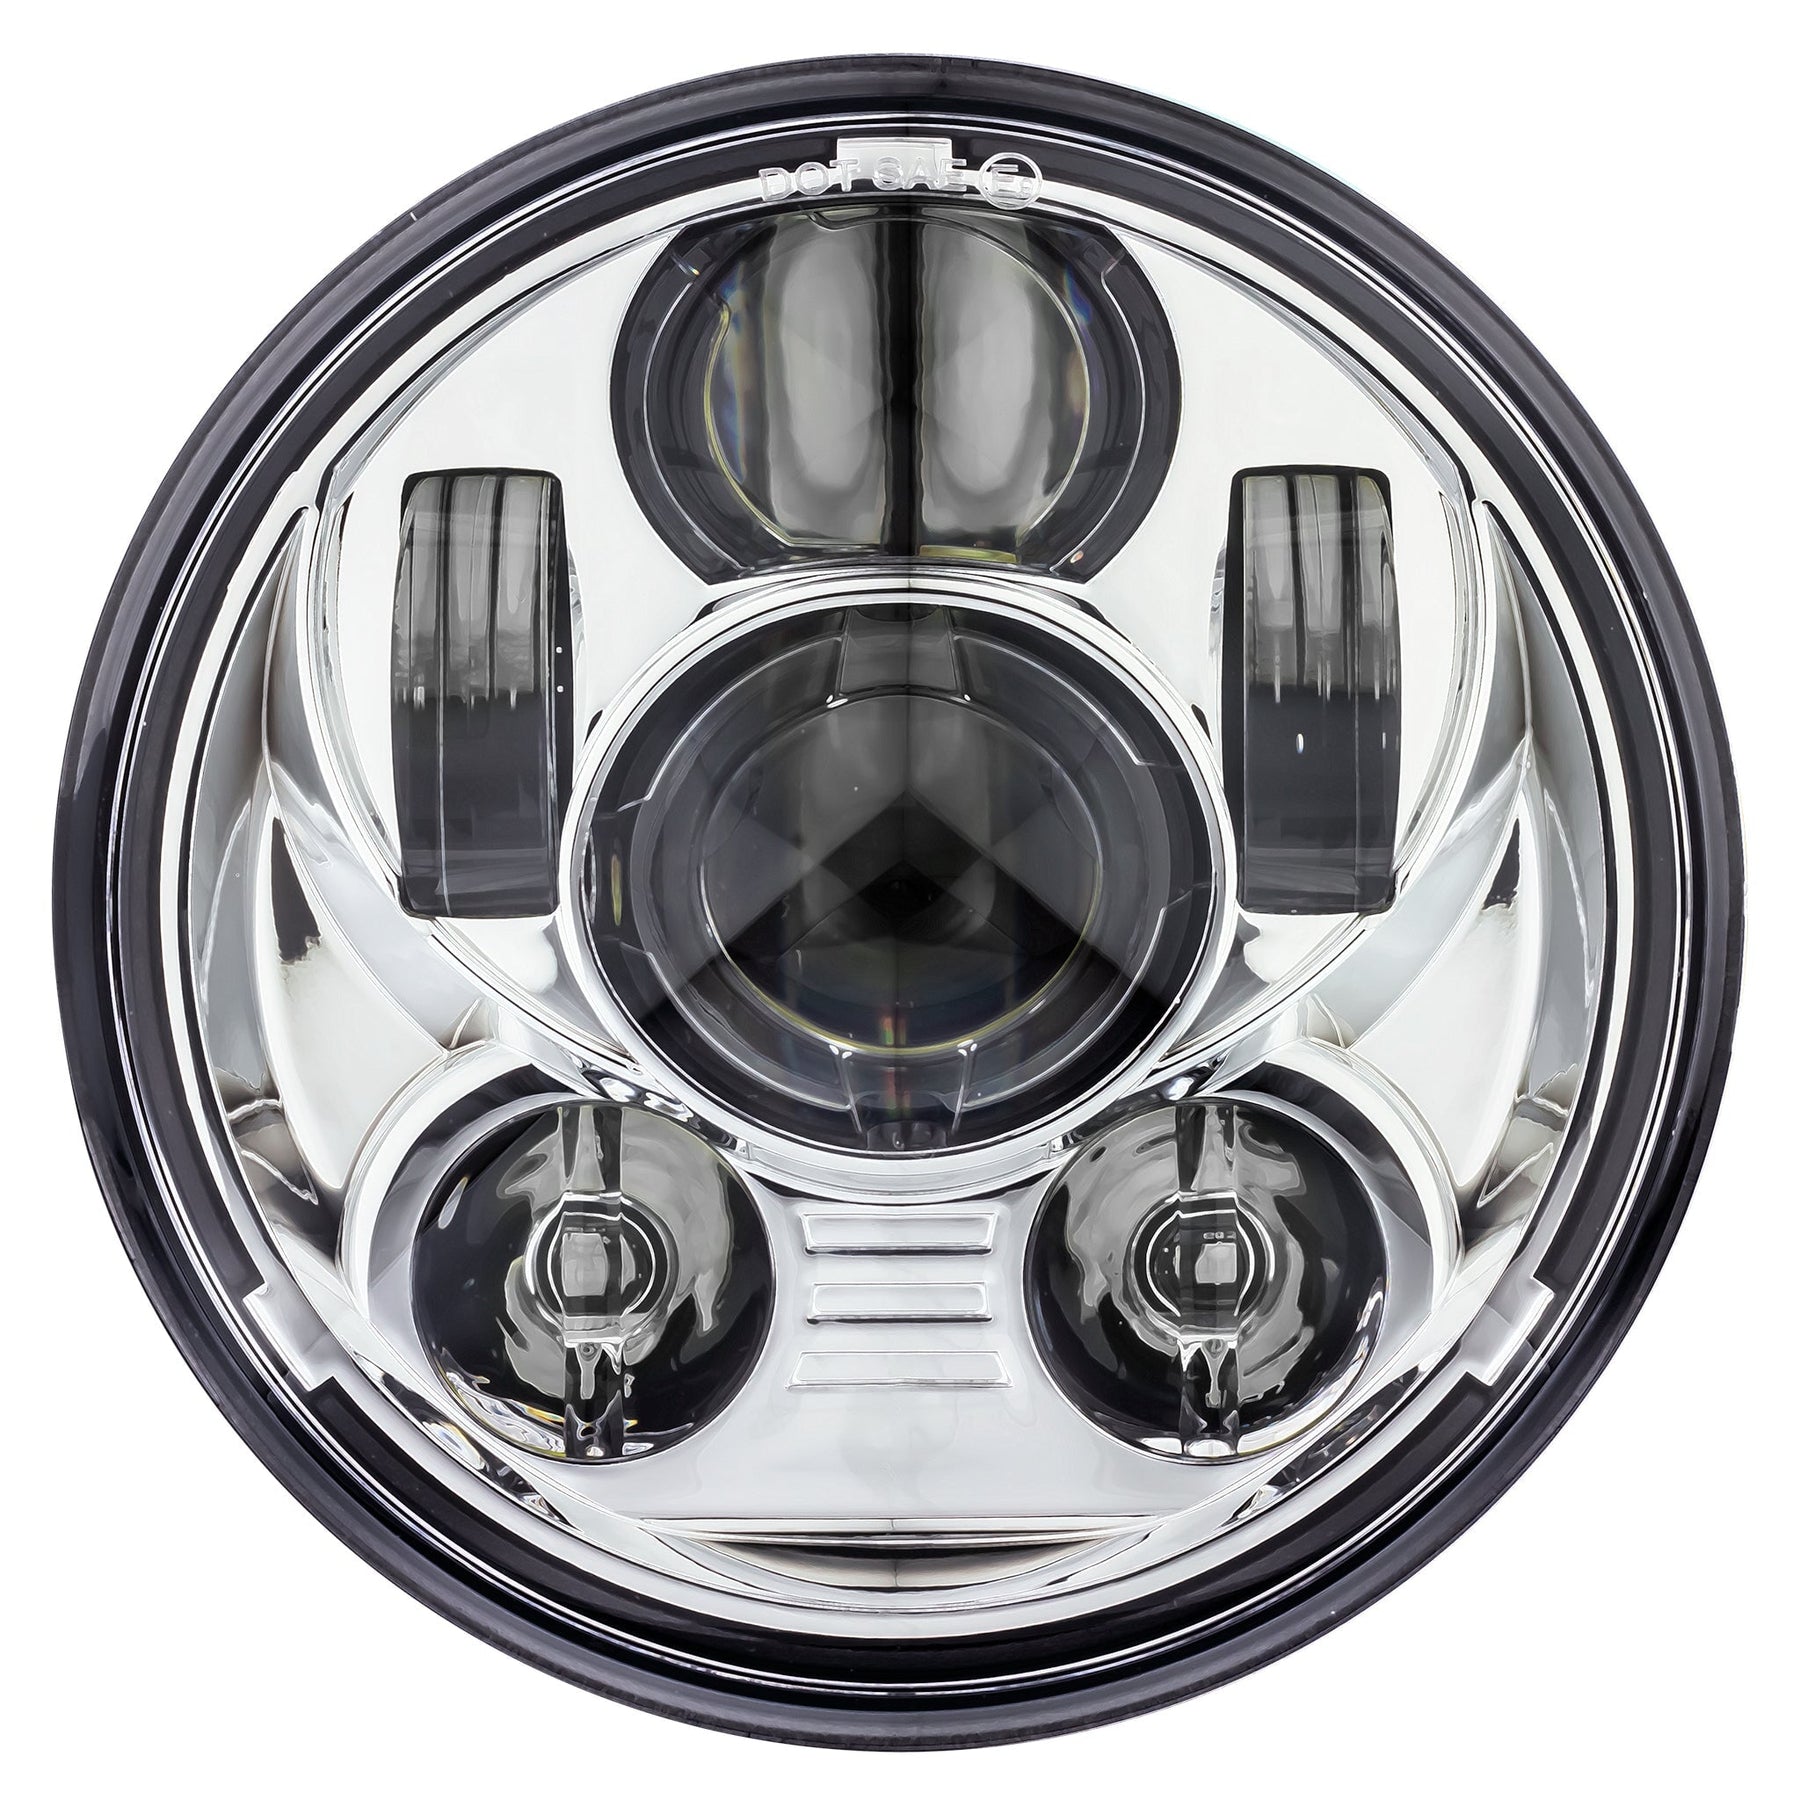 Eagle Lights 5.75-inch Chrome LED Projection Headlight for